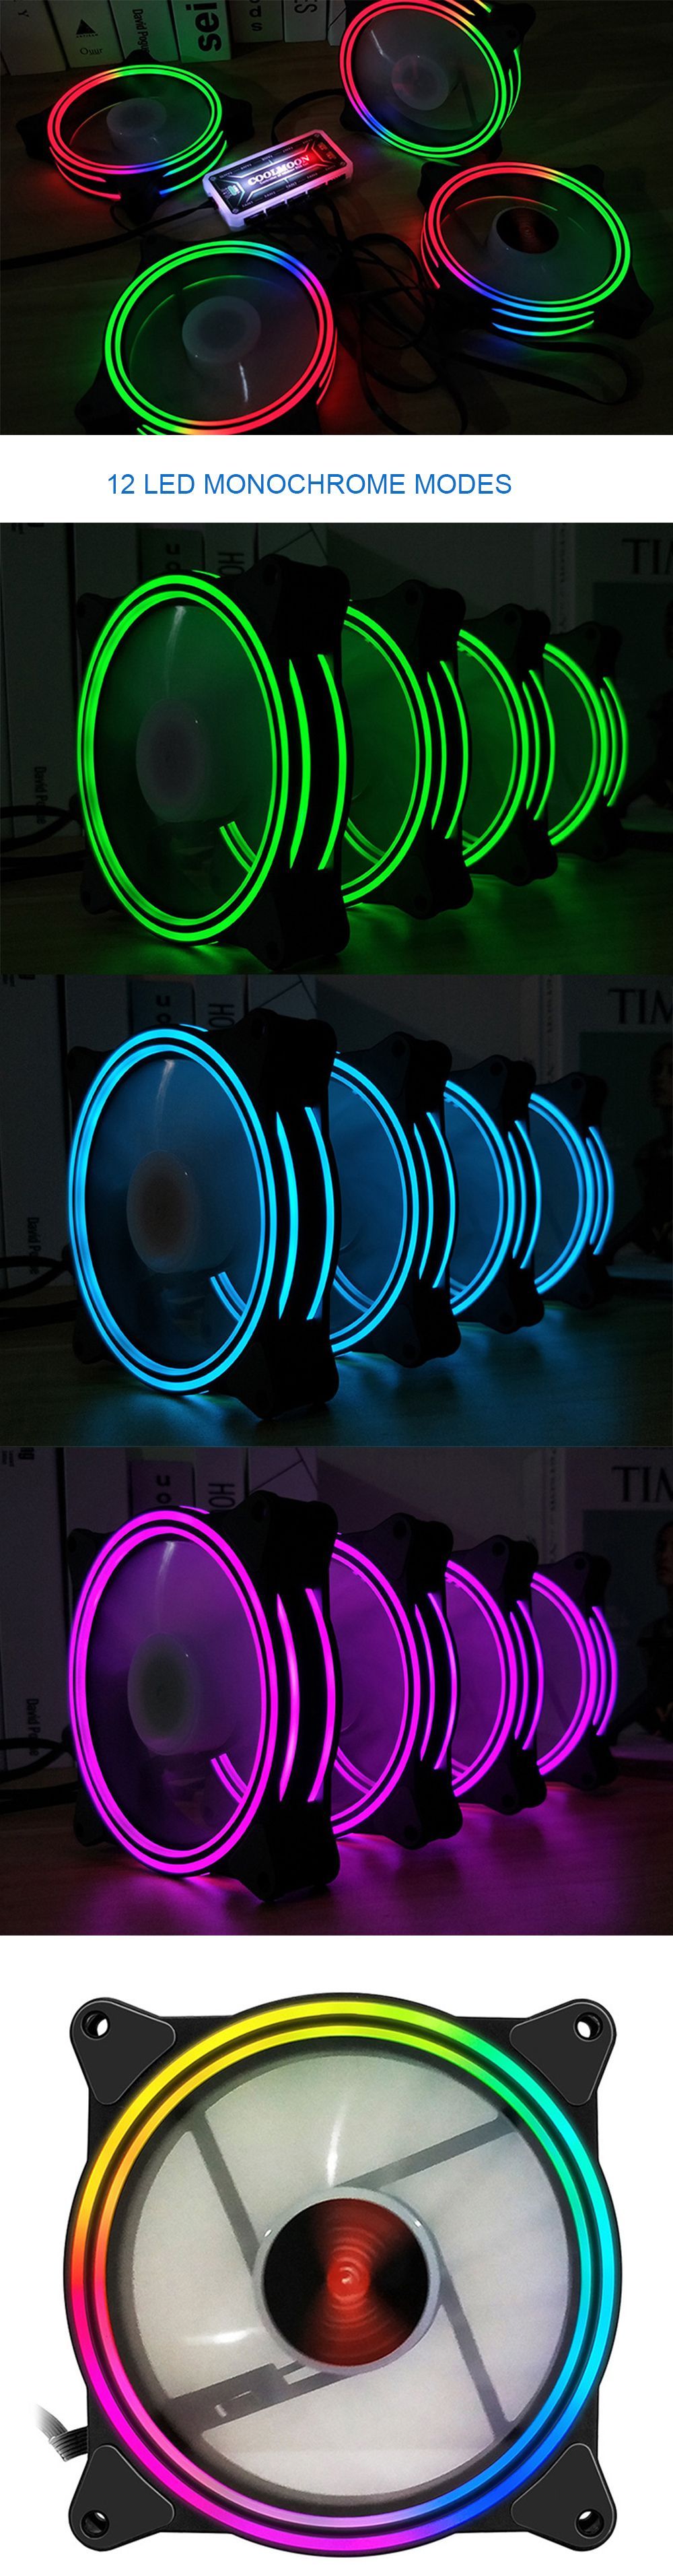 Coolmoon-5PCS-120mm-RGB-Adjustable-LED-Cooling-Fan-Multiple-Thin-Apertures-CPU-Cooling-Fan-with-the--1579359